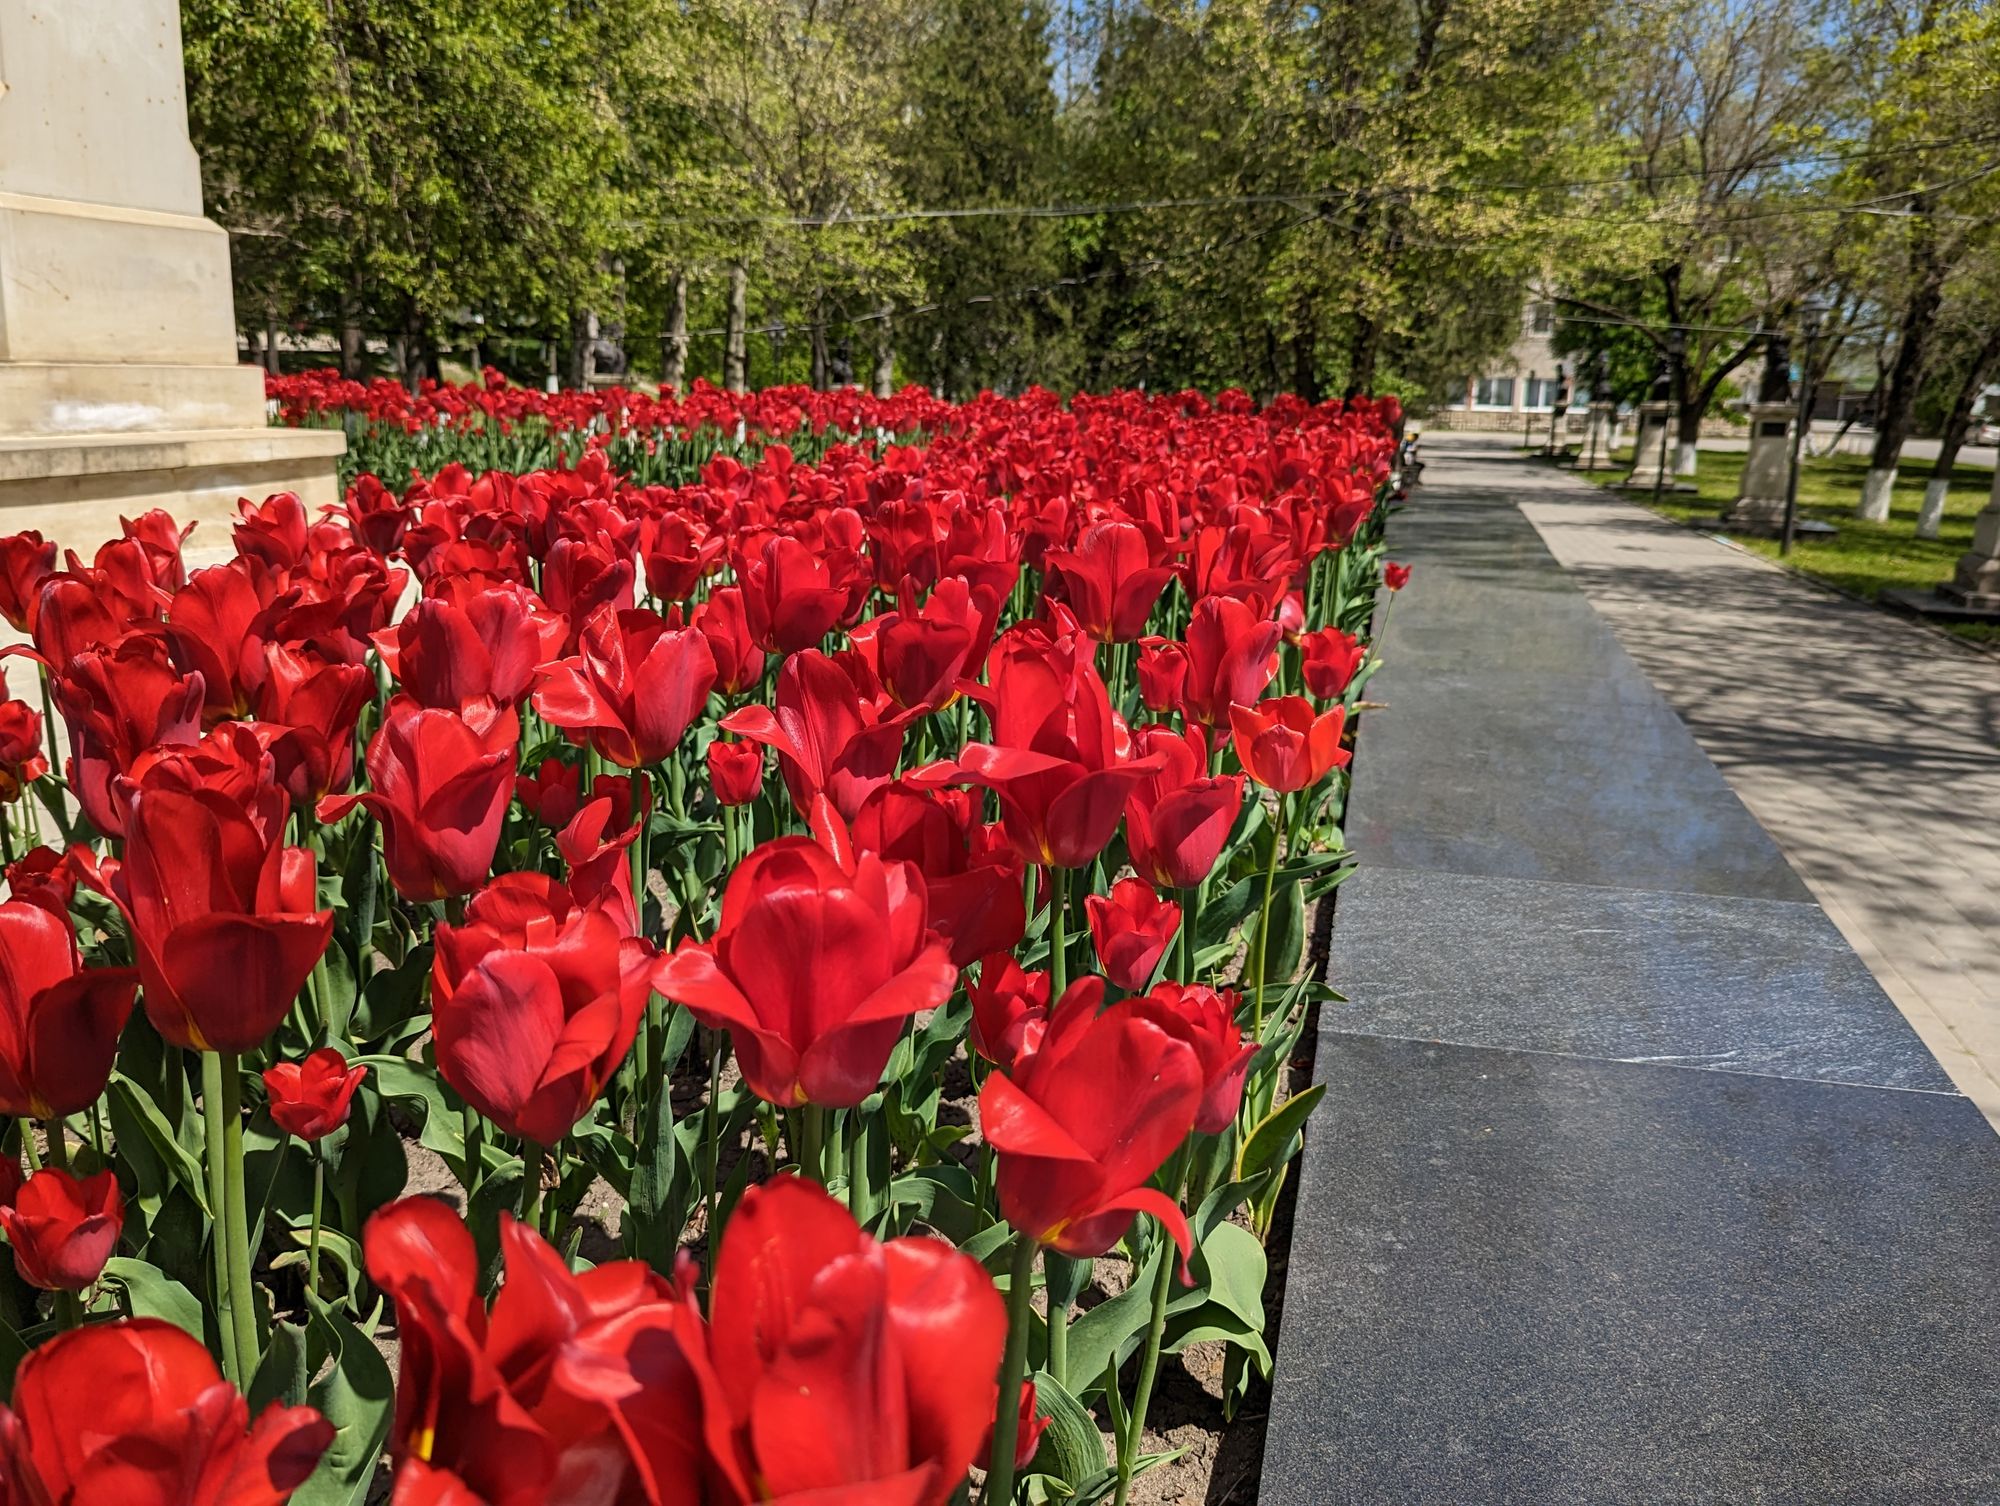 Row of tulips in front of statue in Chișinău